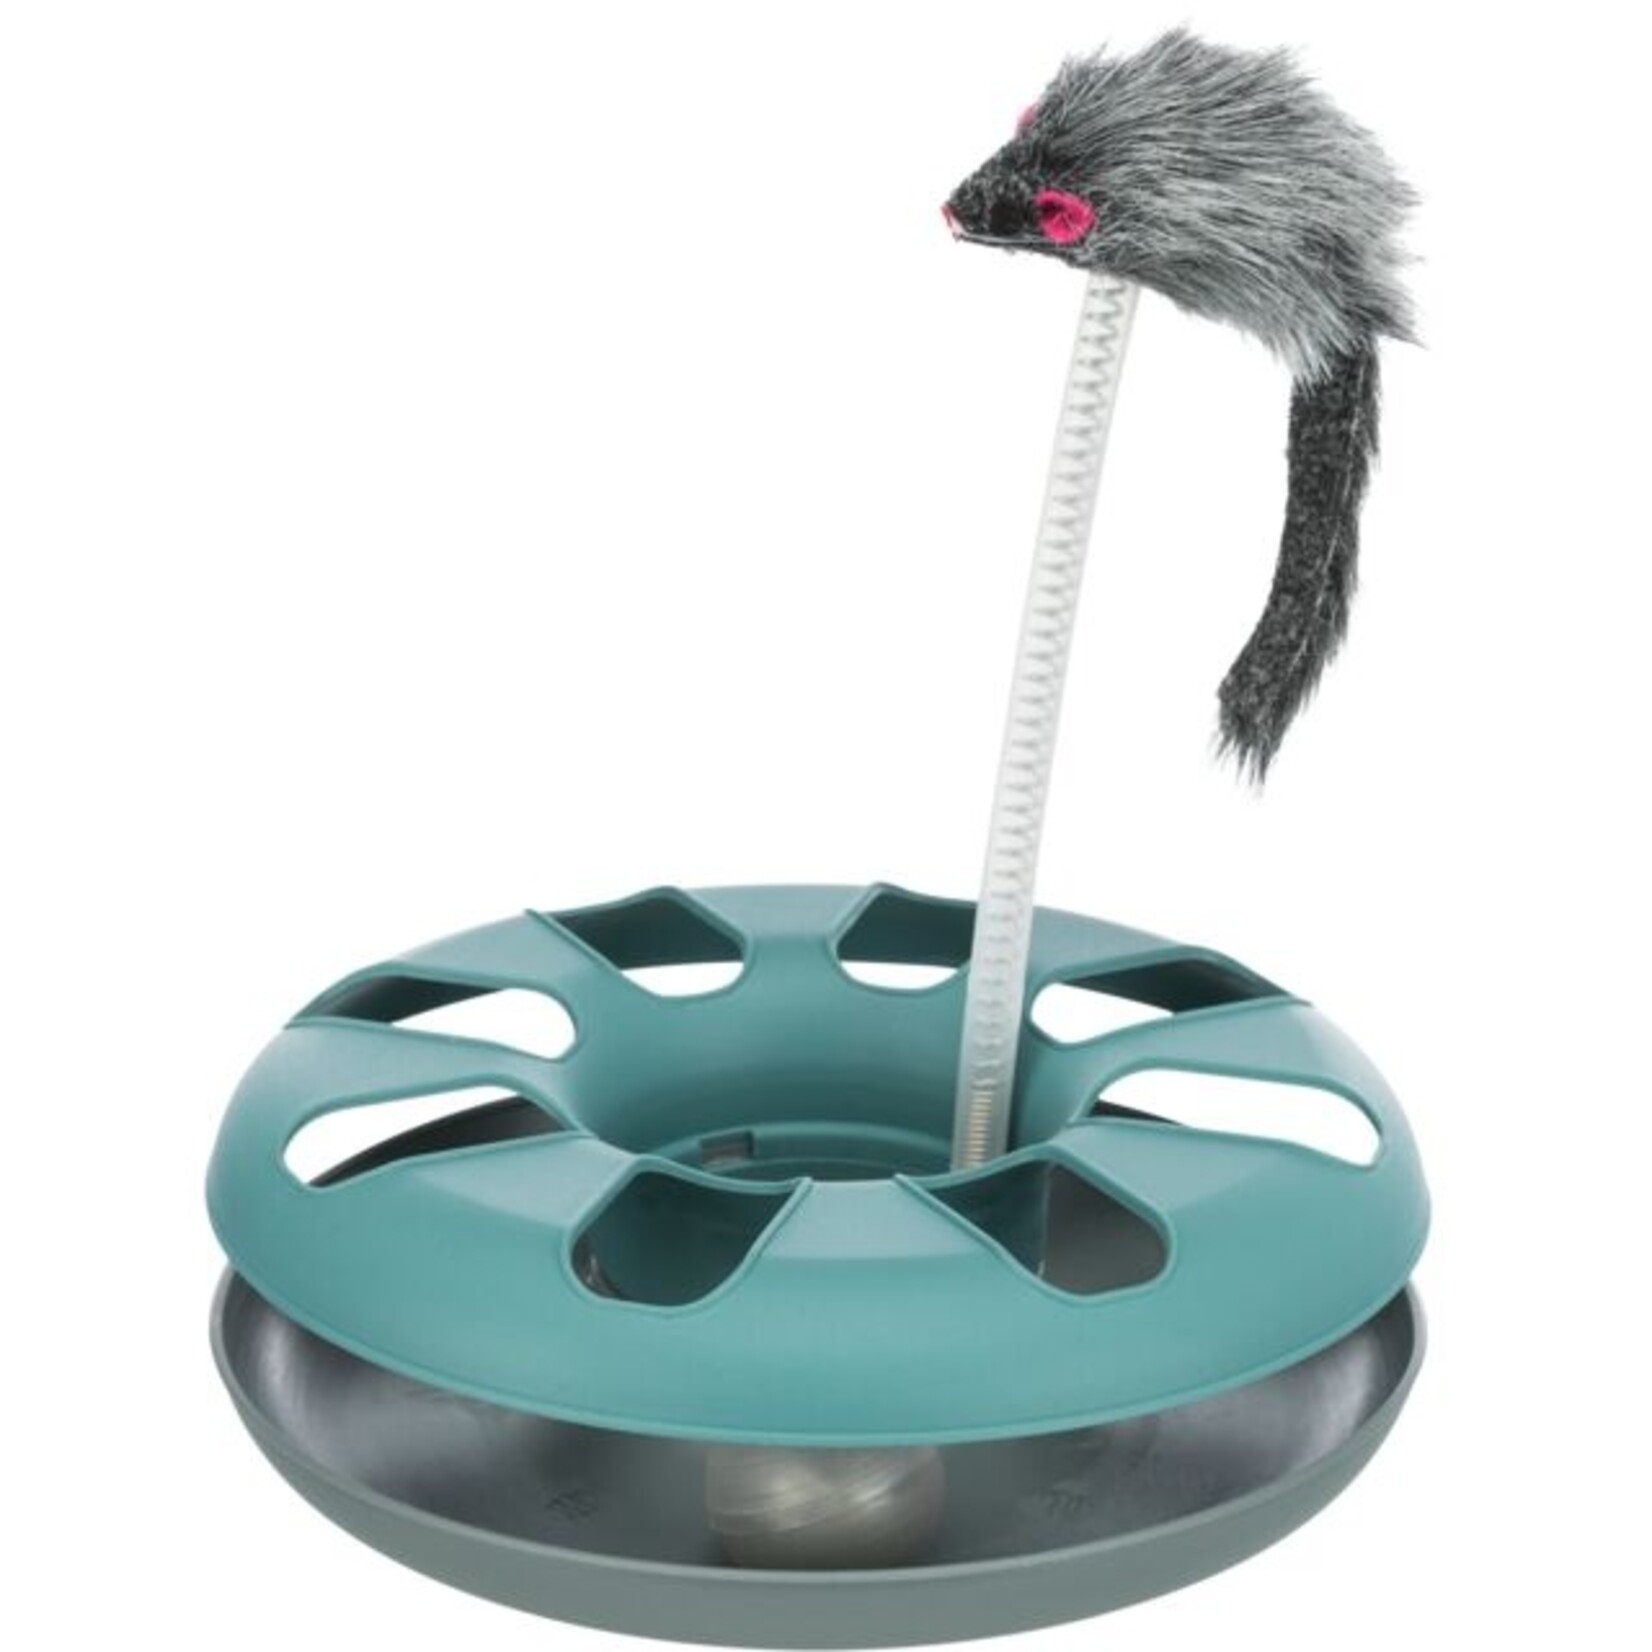 Trixie Crazy Circle - Interactive Cat Toy - Trixie